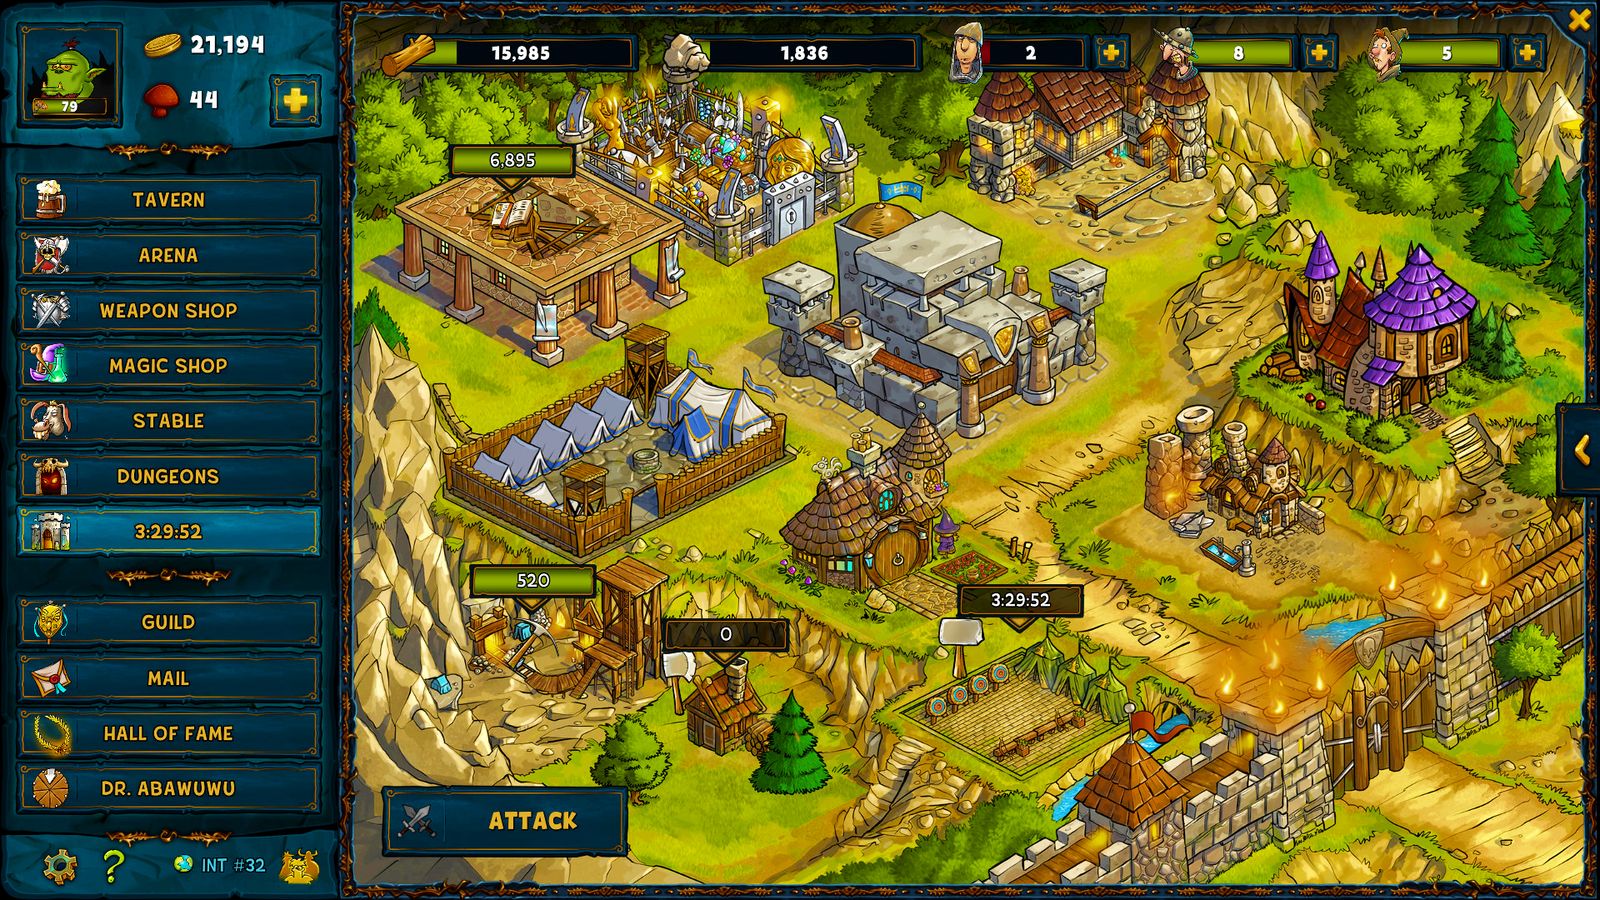 Shakes and Fidget gameplay, with a game menu on the left and the player's city on the right.